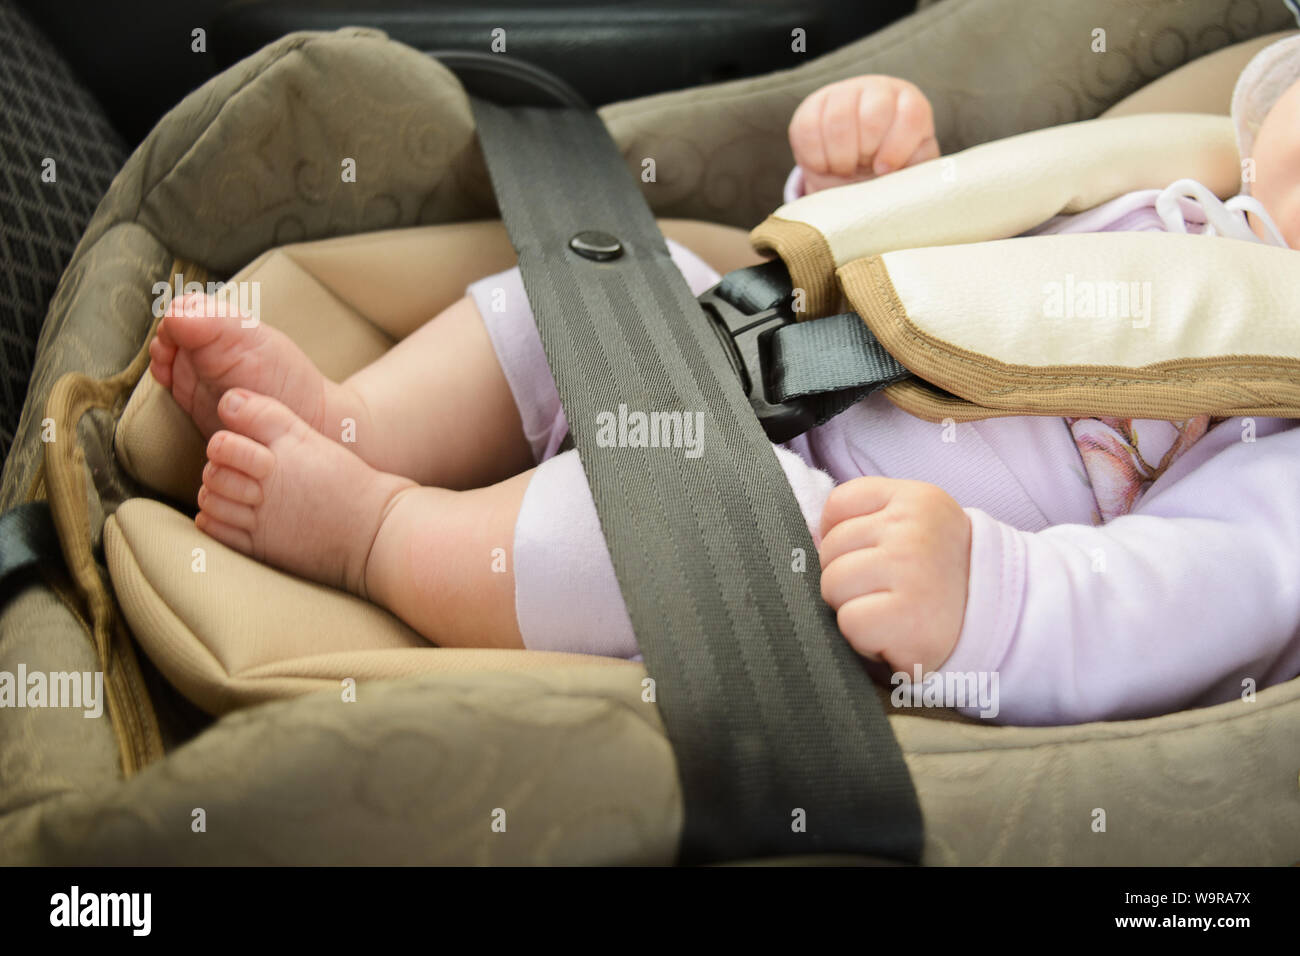 Safety concept, protection of child in travel, children feet in baby seat. Small newborn baby sitting in special car seat with safety seatbelts Stock Photo